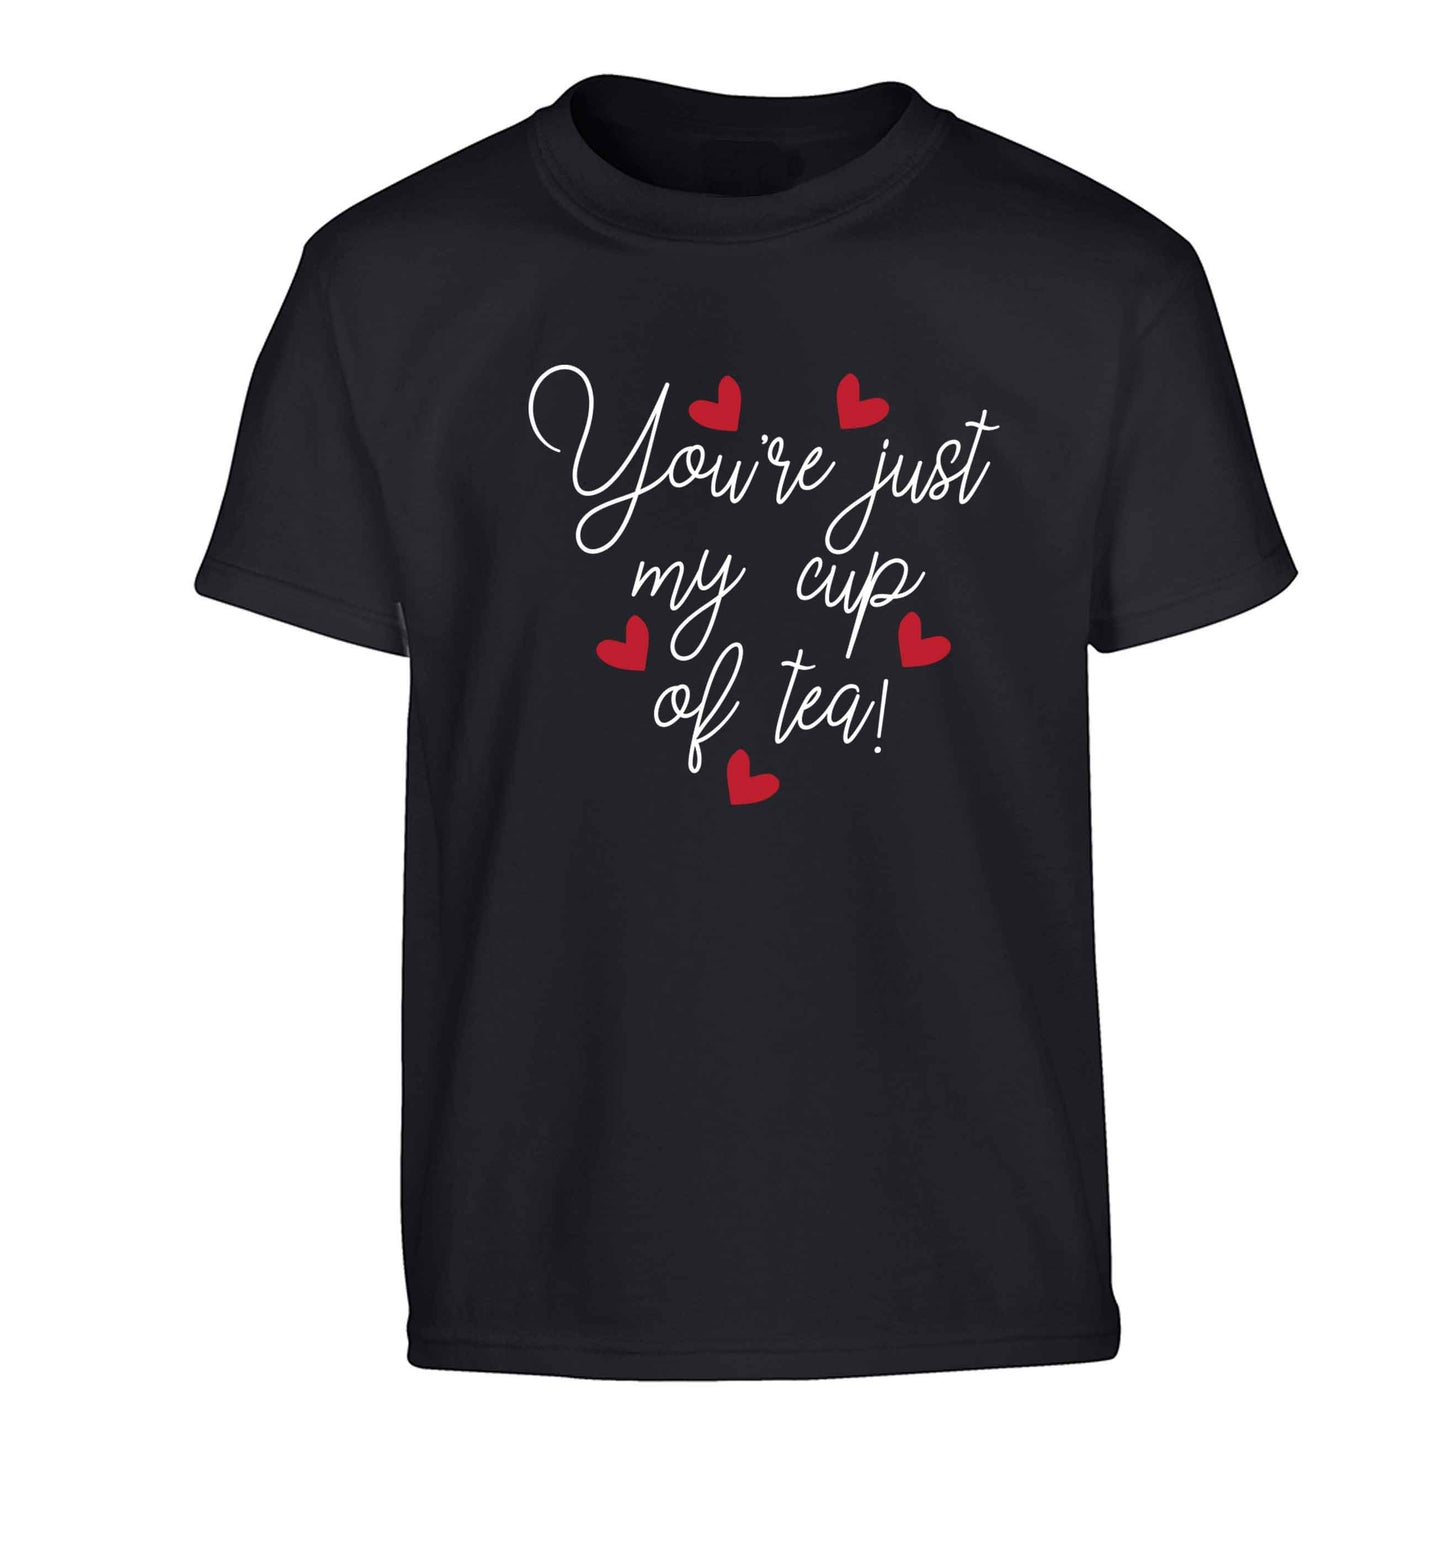 You're just my cup of tea Children's black Tshirt 12-13 Years